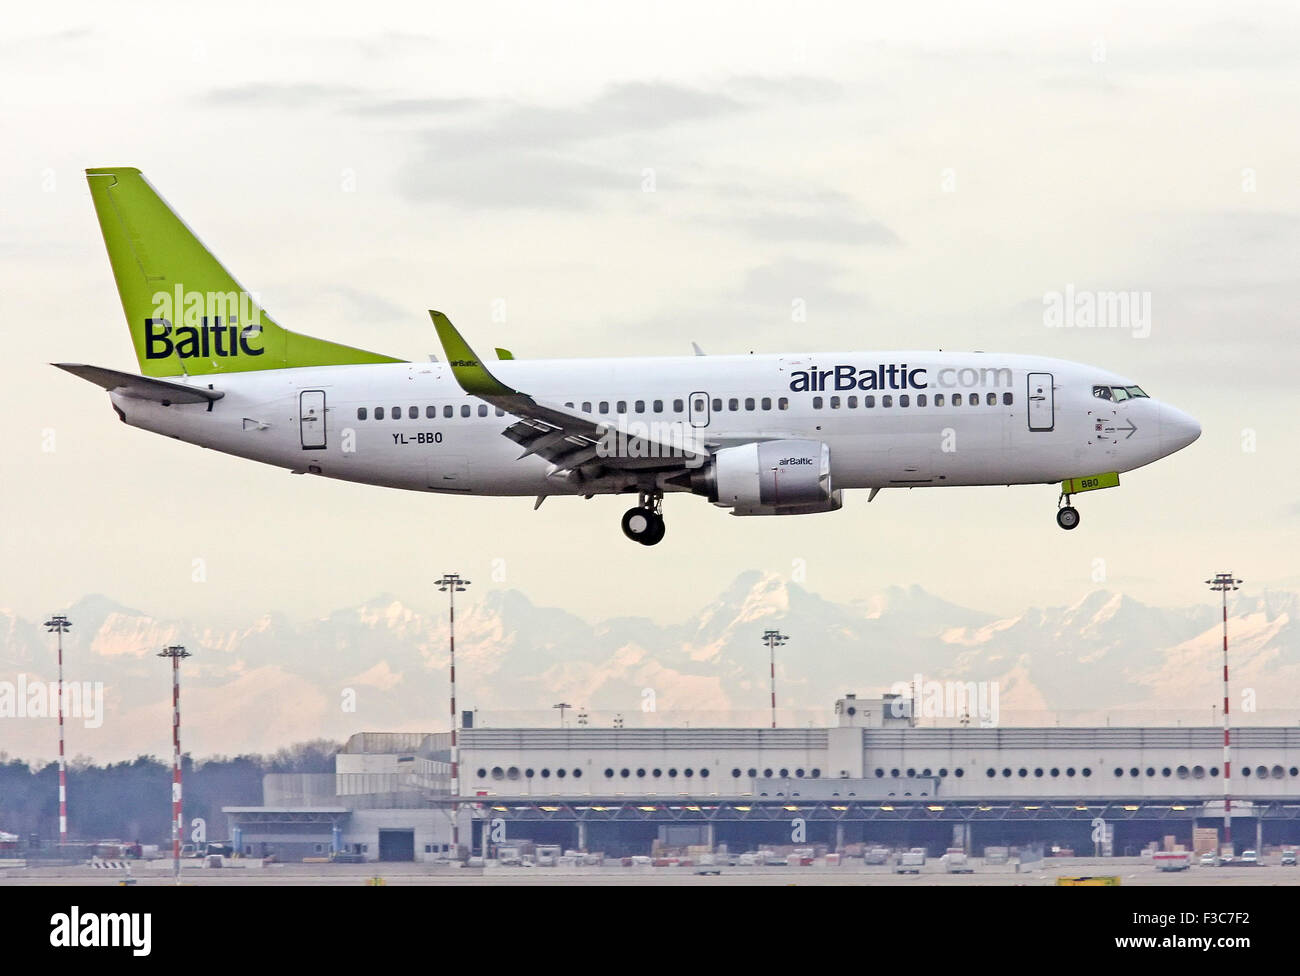 Air Baltic Boeing 737-300 Photographed at Linate airport, Milan, Italy Stock Photo